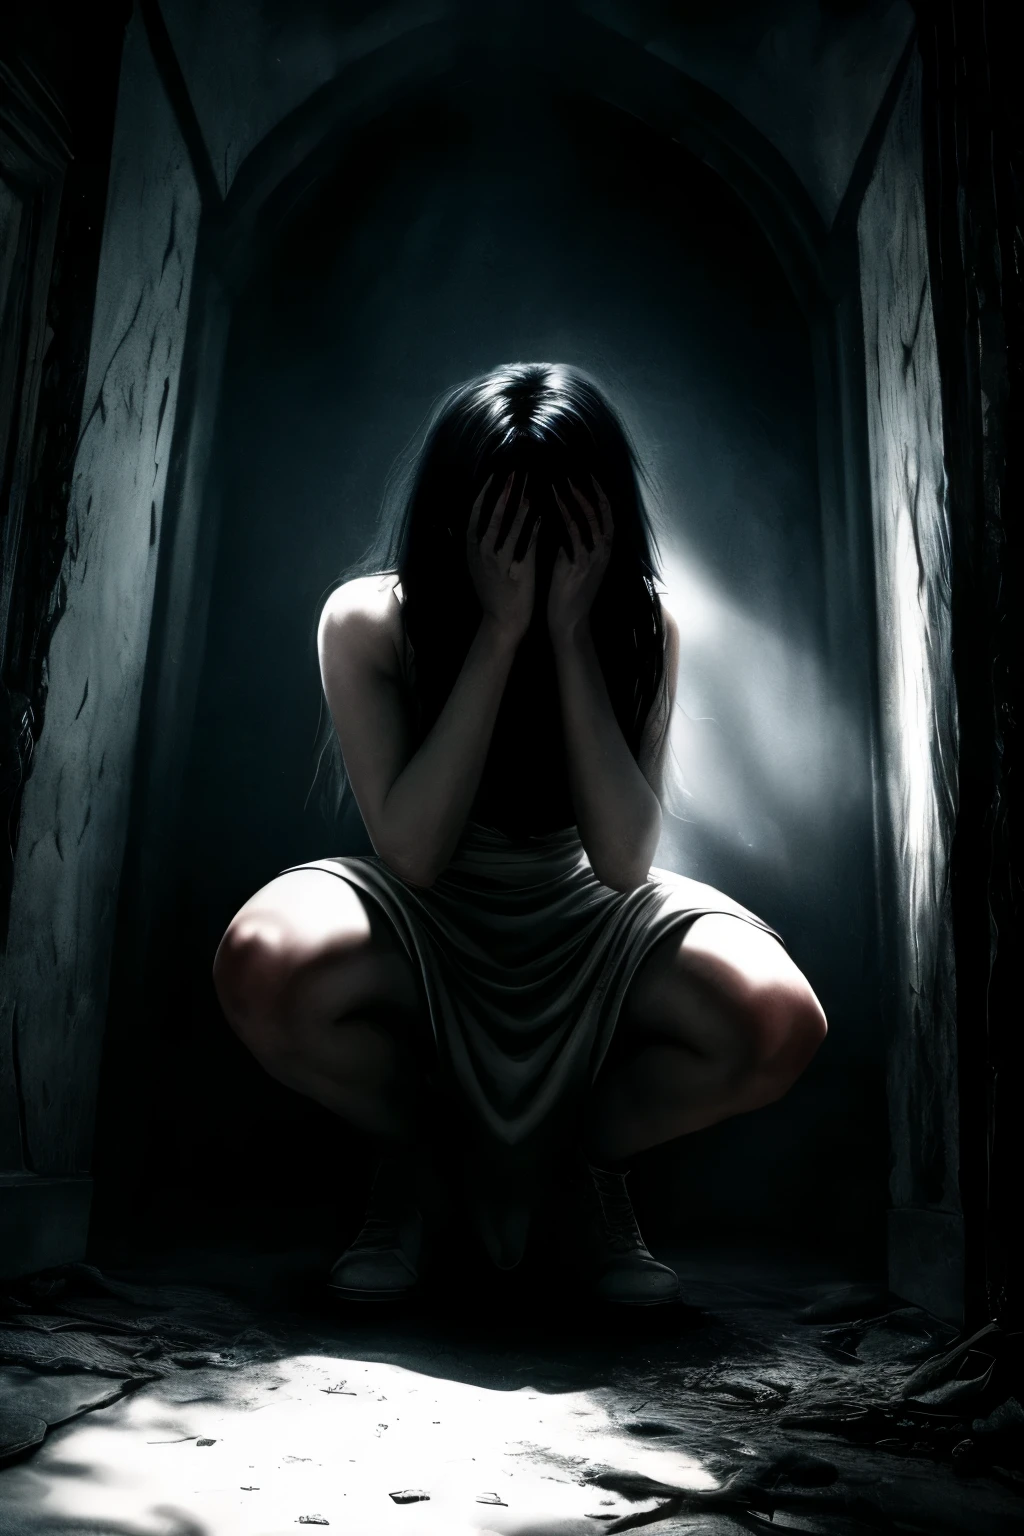 girl with holes in place of eyes, dark gloomy room, detailed, blue bubble, full HD, black hair covering face, white dress, crouching, horror style, extremely detailed, chiaroscuro lighting, dramatic shadows, photorealistic, cinematic composition, moody atmosphere